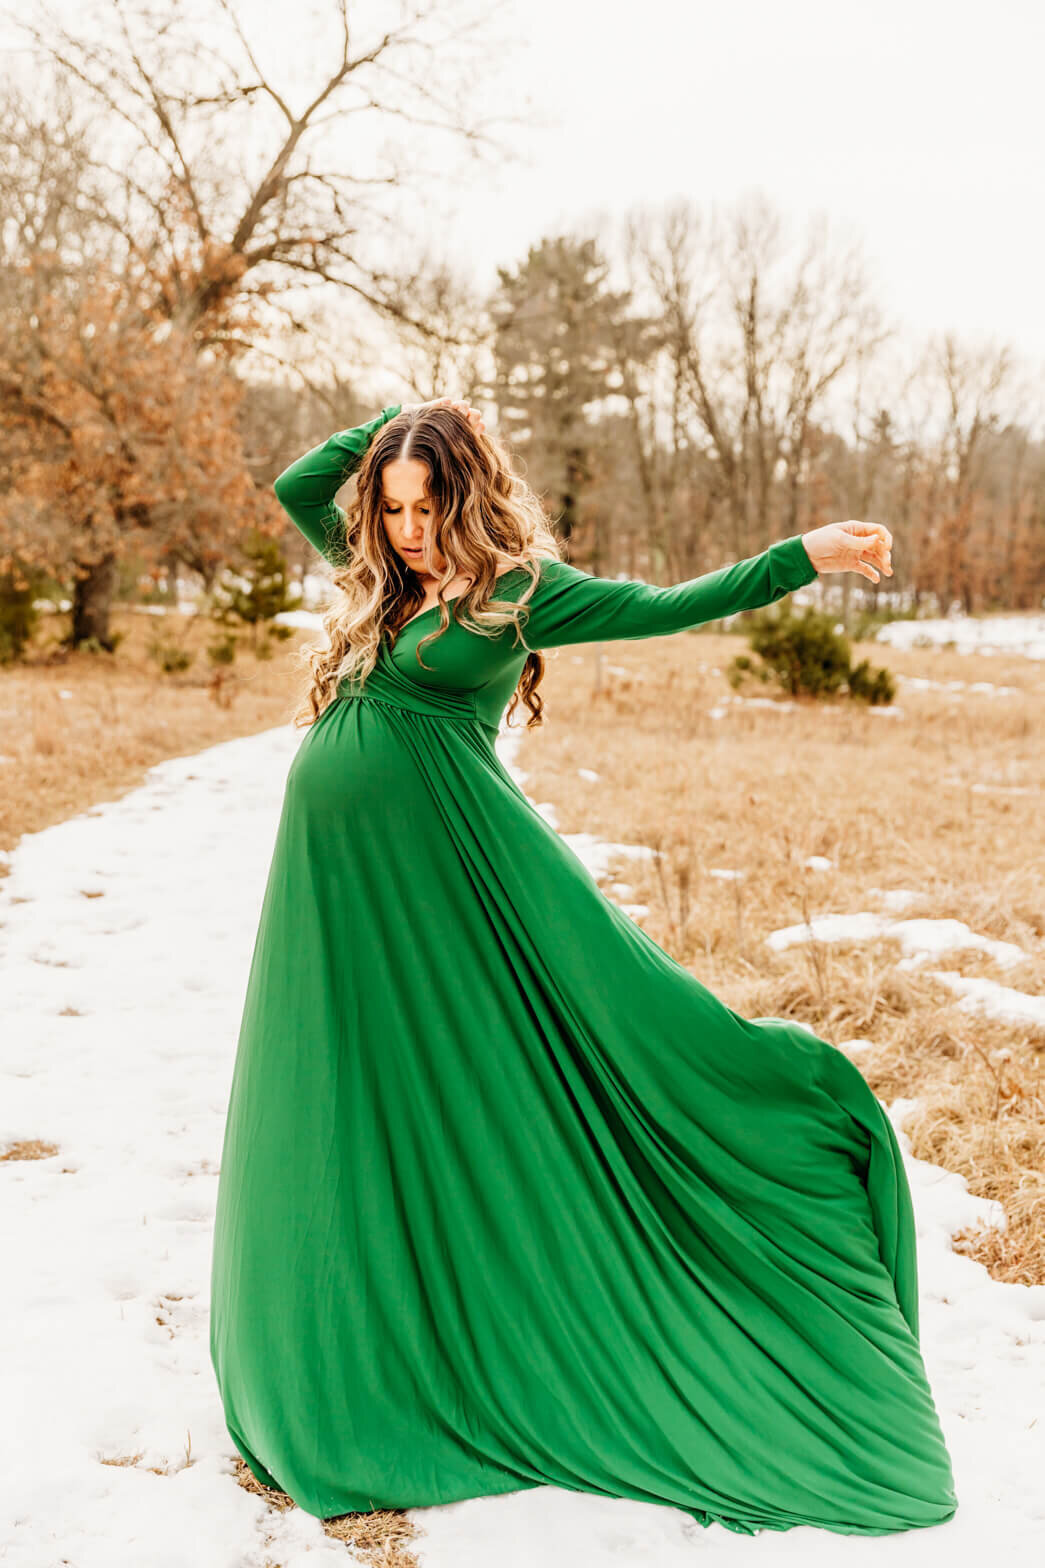 expecting mother throwing her green gown into the air during her winter maternity photo session.